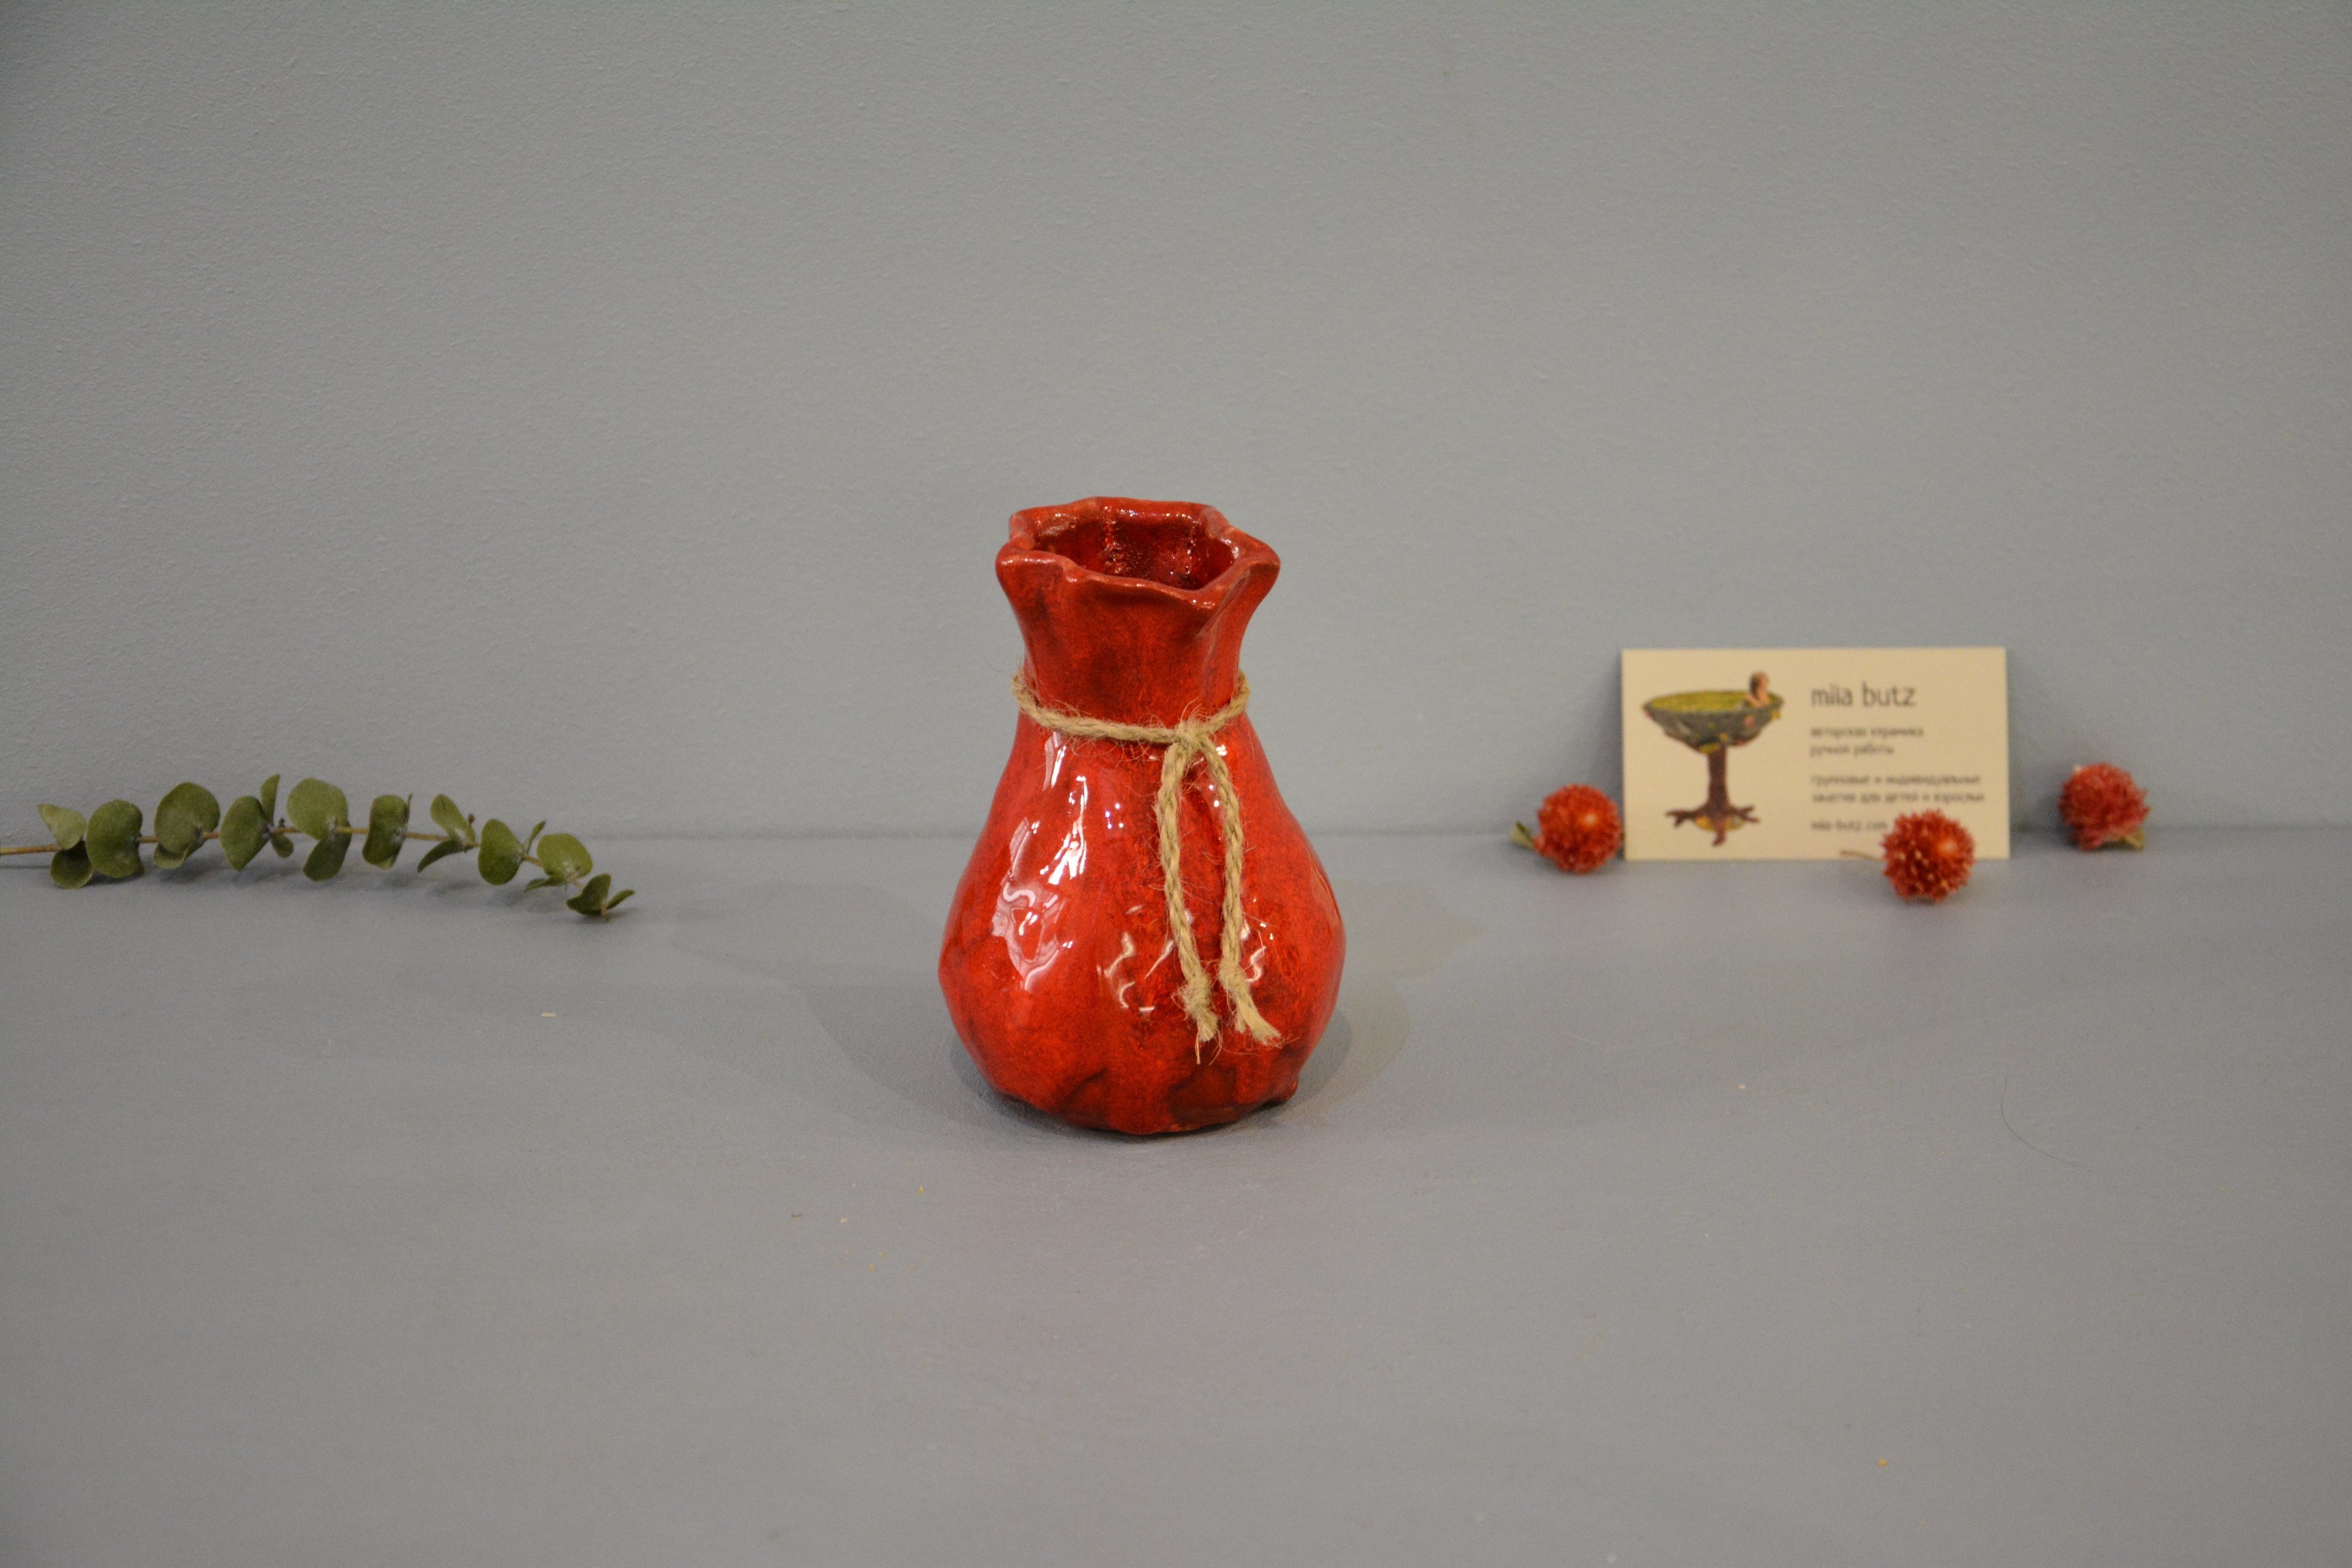 Small Vase or flowers «Red Bagful», height - 12 cm, color - red. Photo 1435.